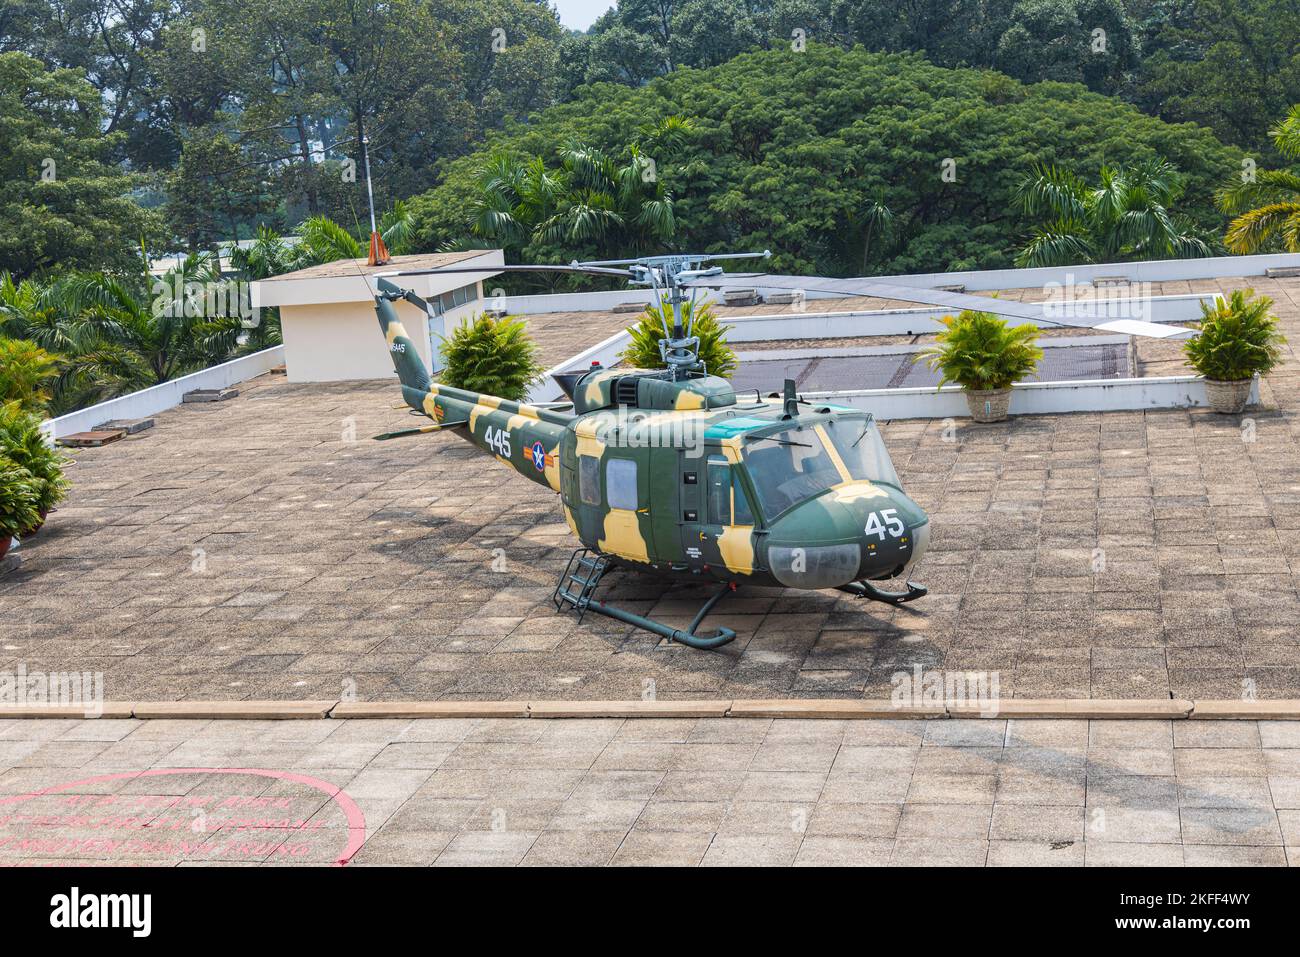 Ho Chi Minh City, Vietnam - November 07, 2022: Helicopter on the roof of the independence palace or reunification palace in Saigon. Built on the site Stock Photo